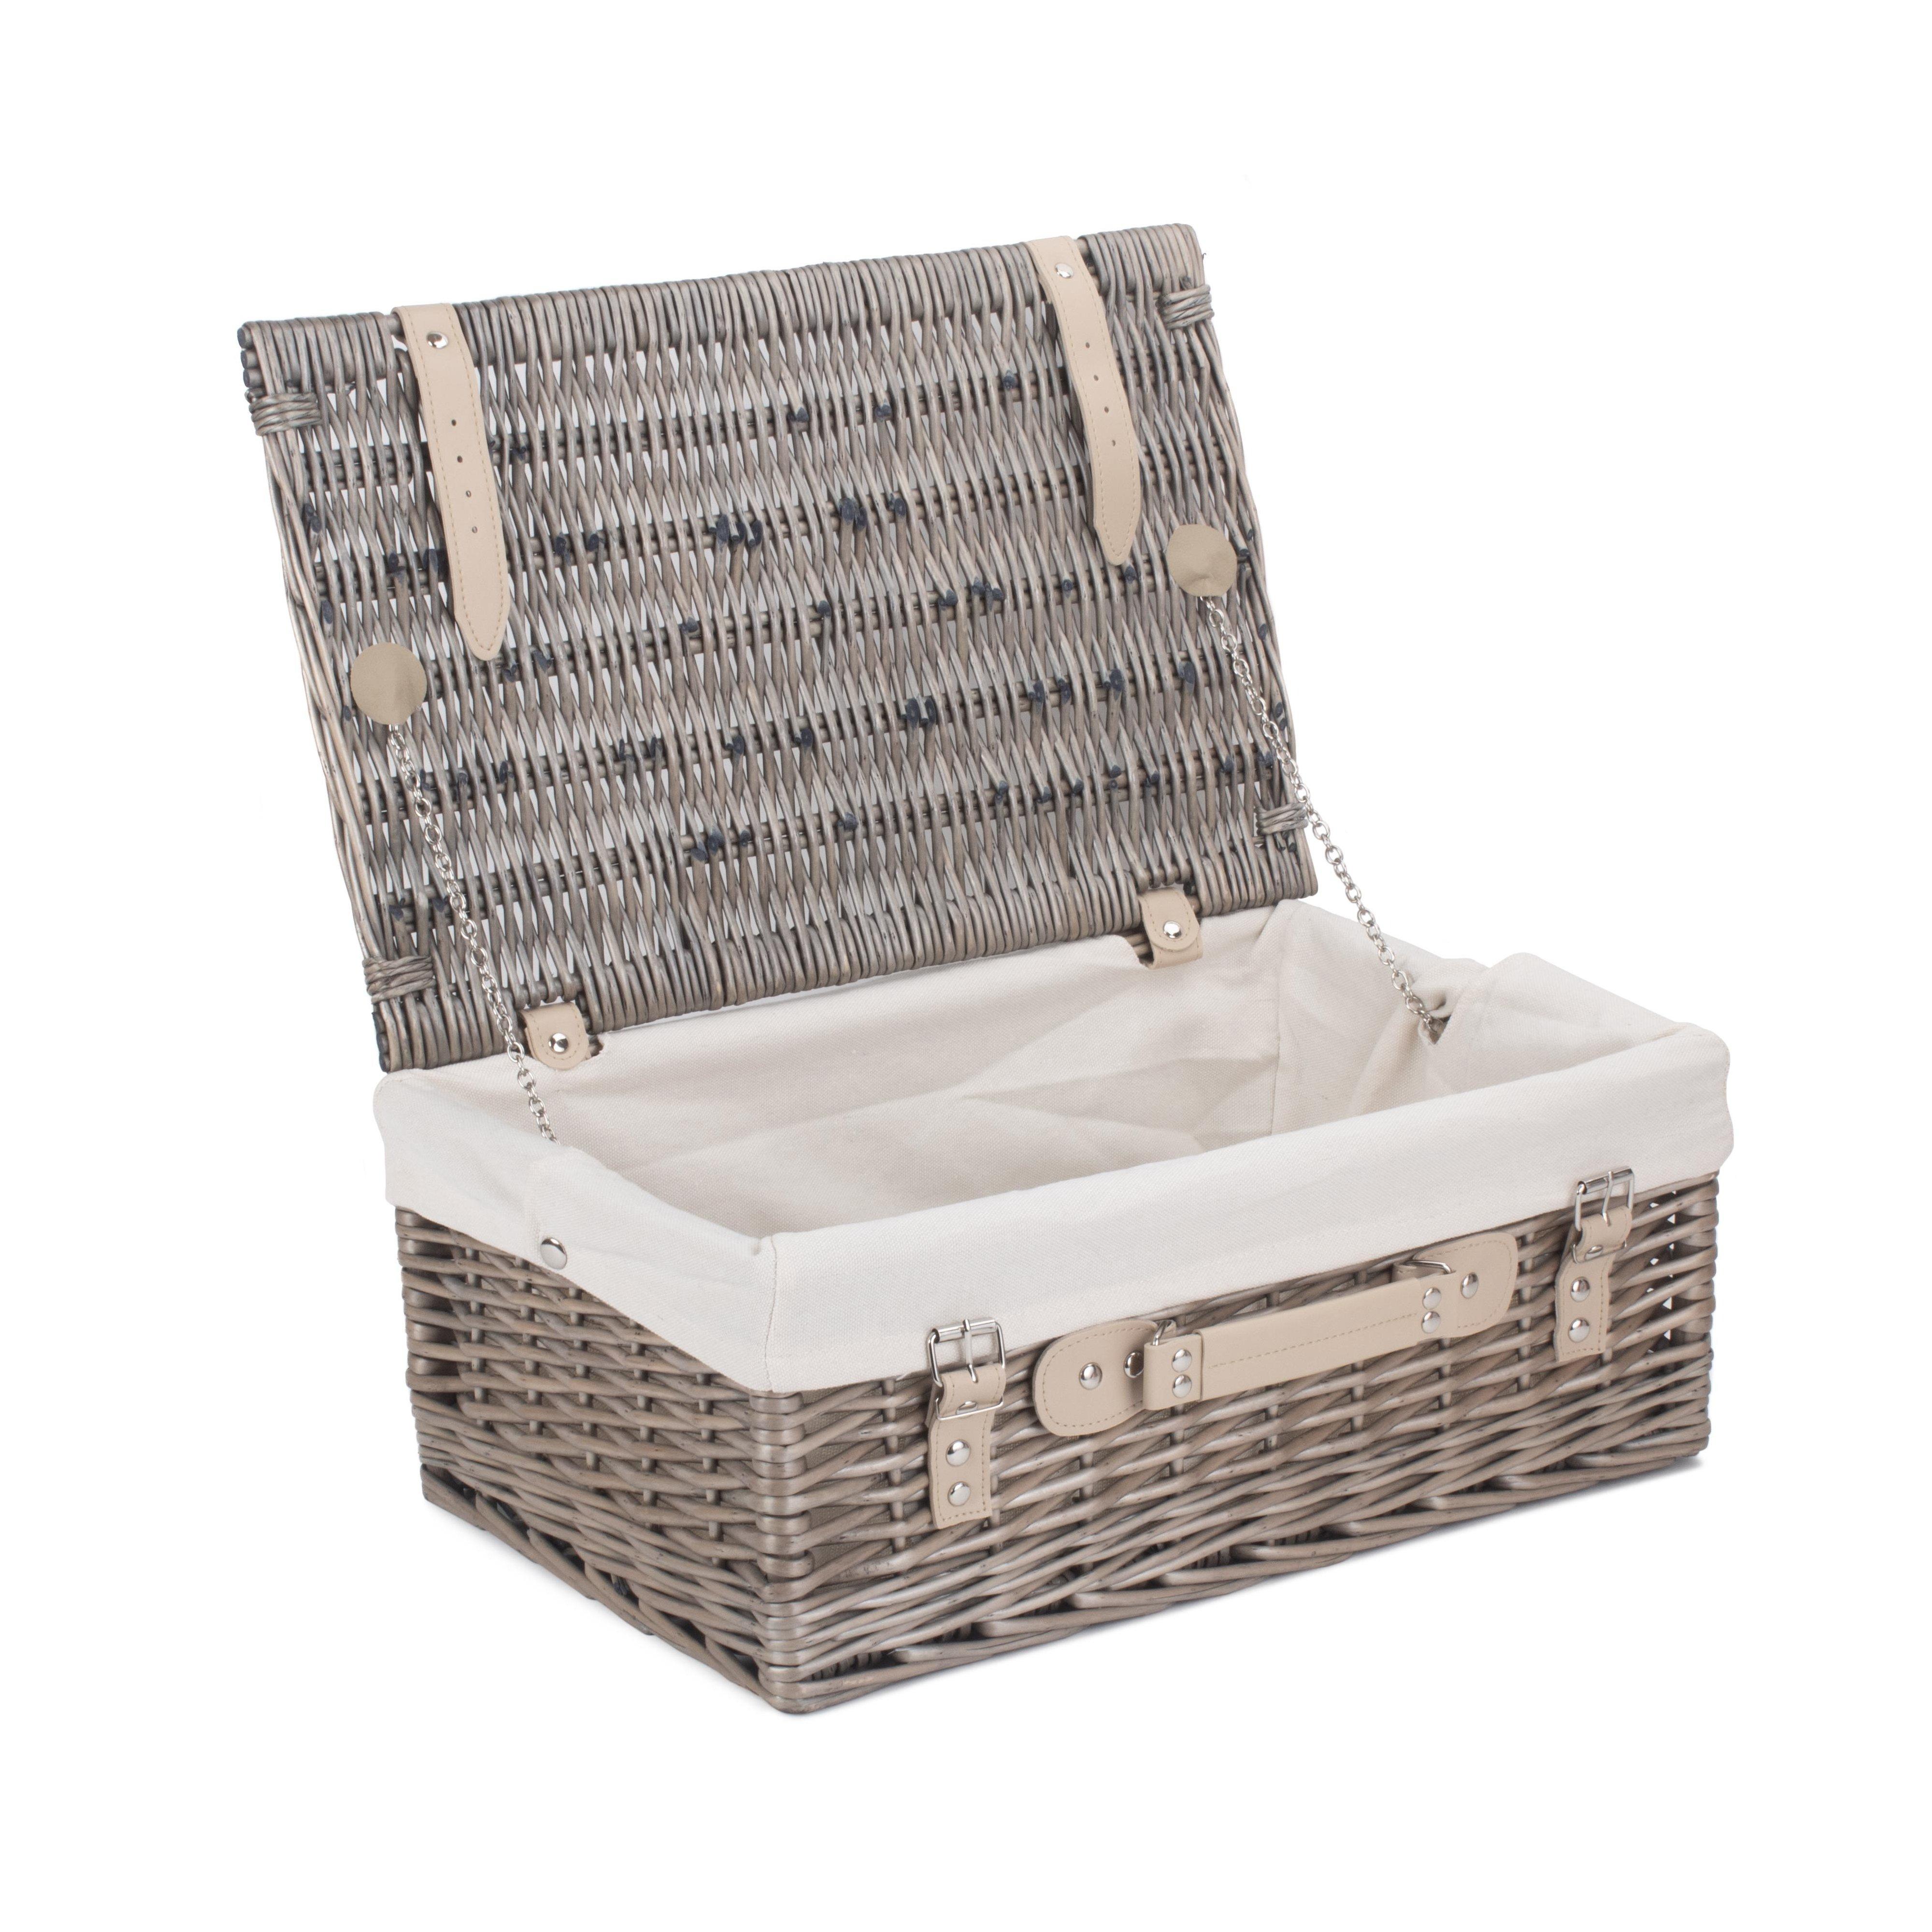 Wicker 45cm Antique Wash Picnic Basket with Cotton Lining